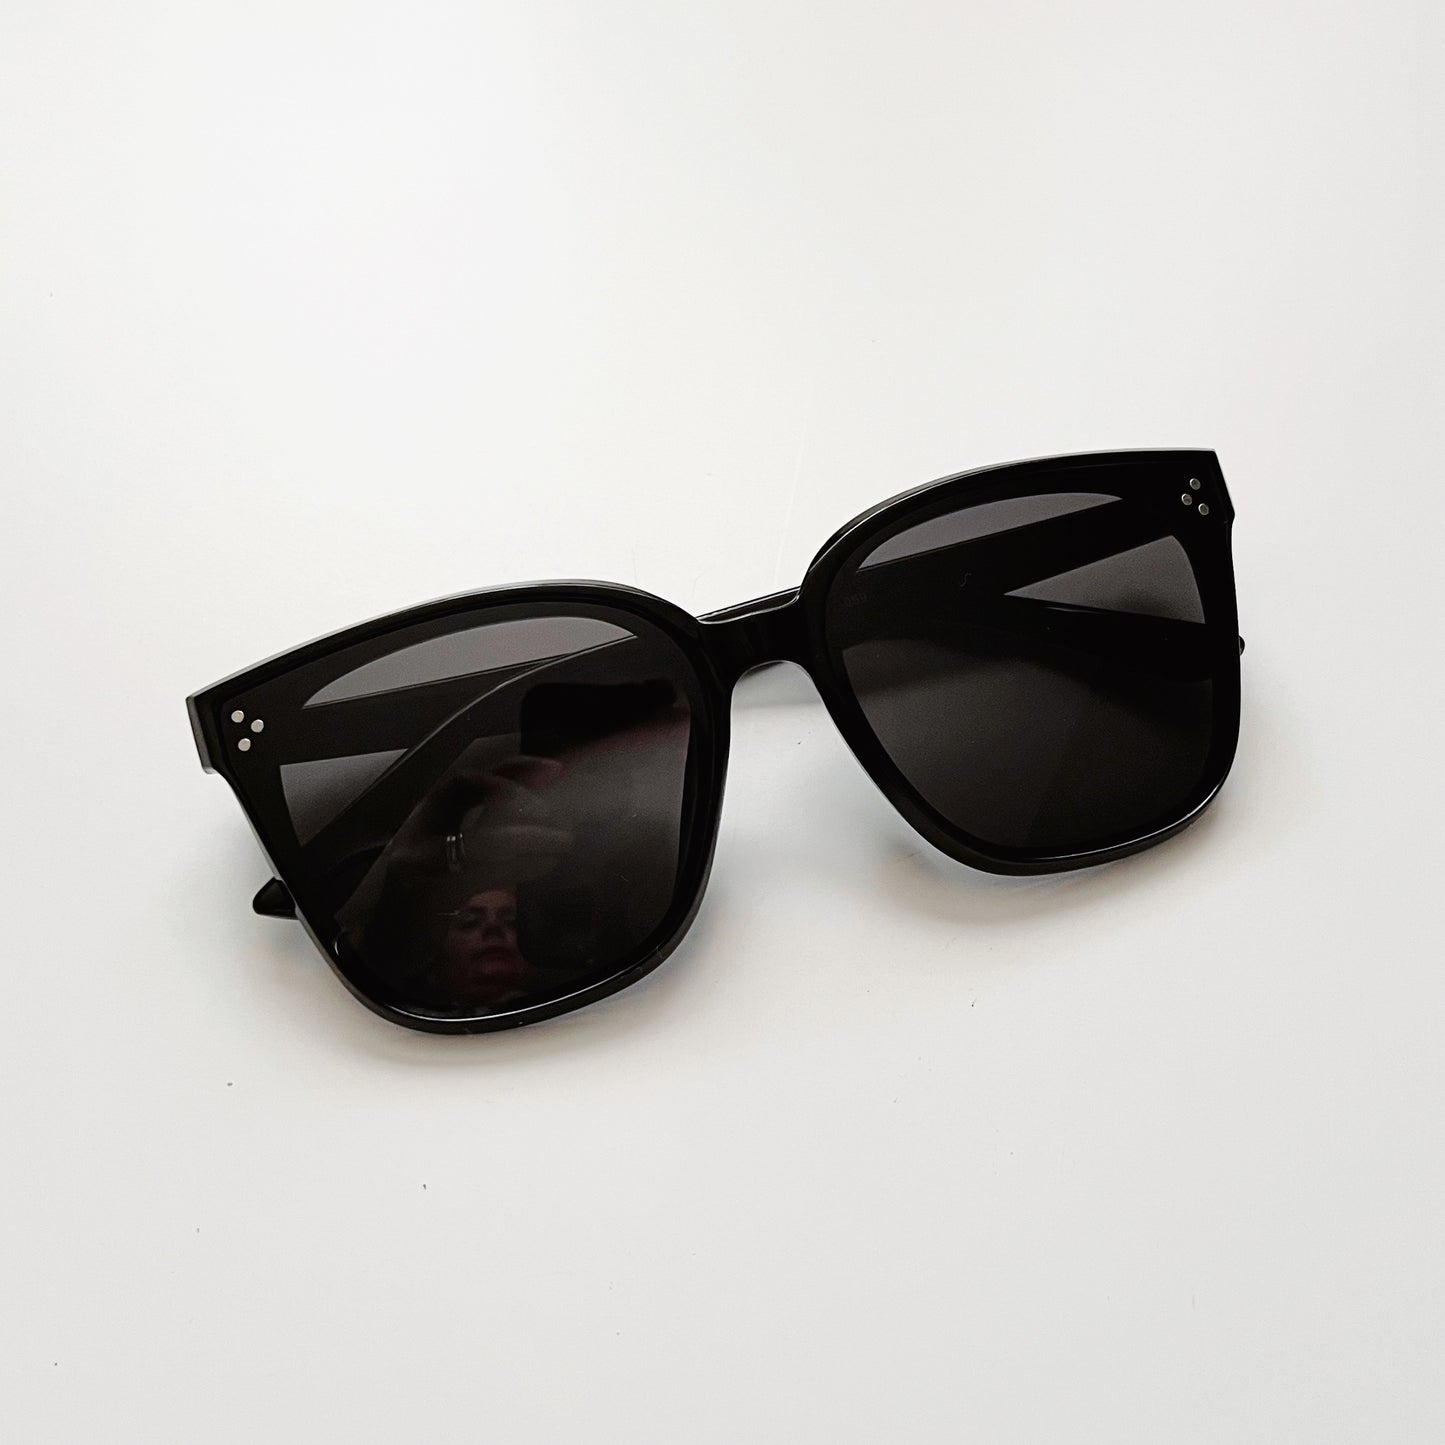 The Mikie Sunglasses